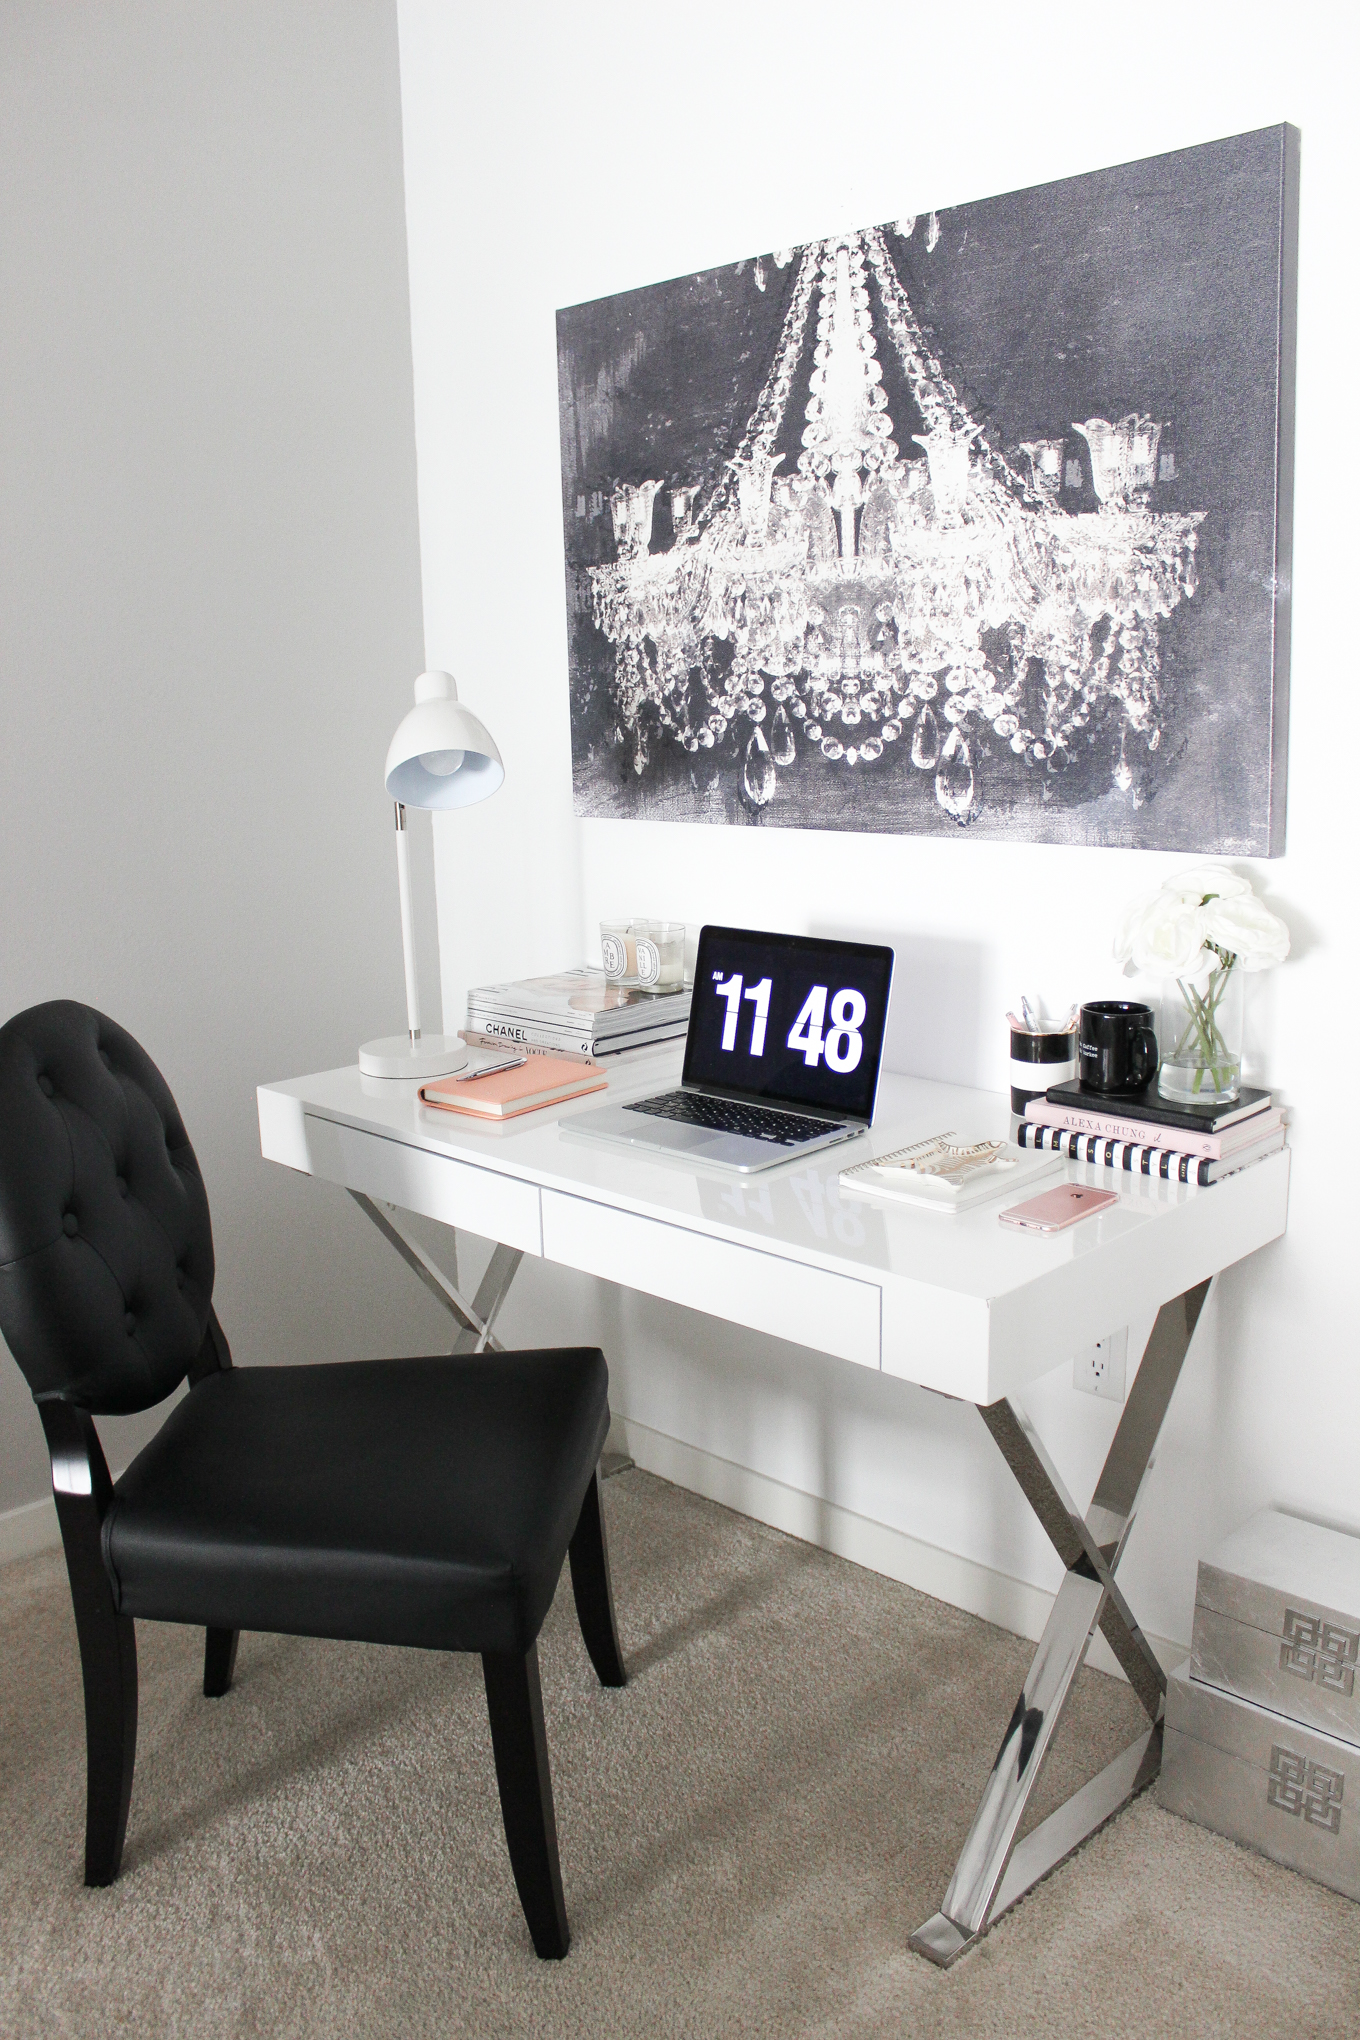 Blondie in the City | Office Space Decor, Desk Decor, Black and White office Decor, White Office Desk, Black Tufted Chair